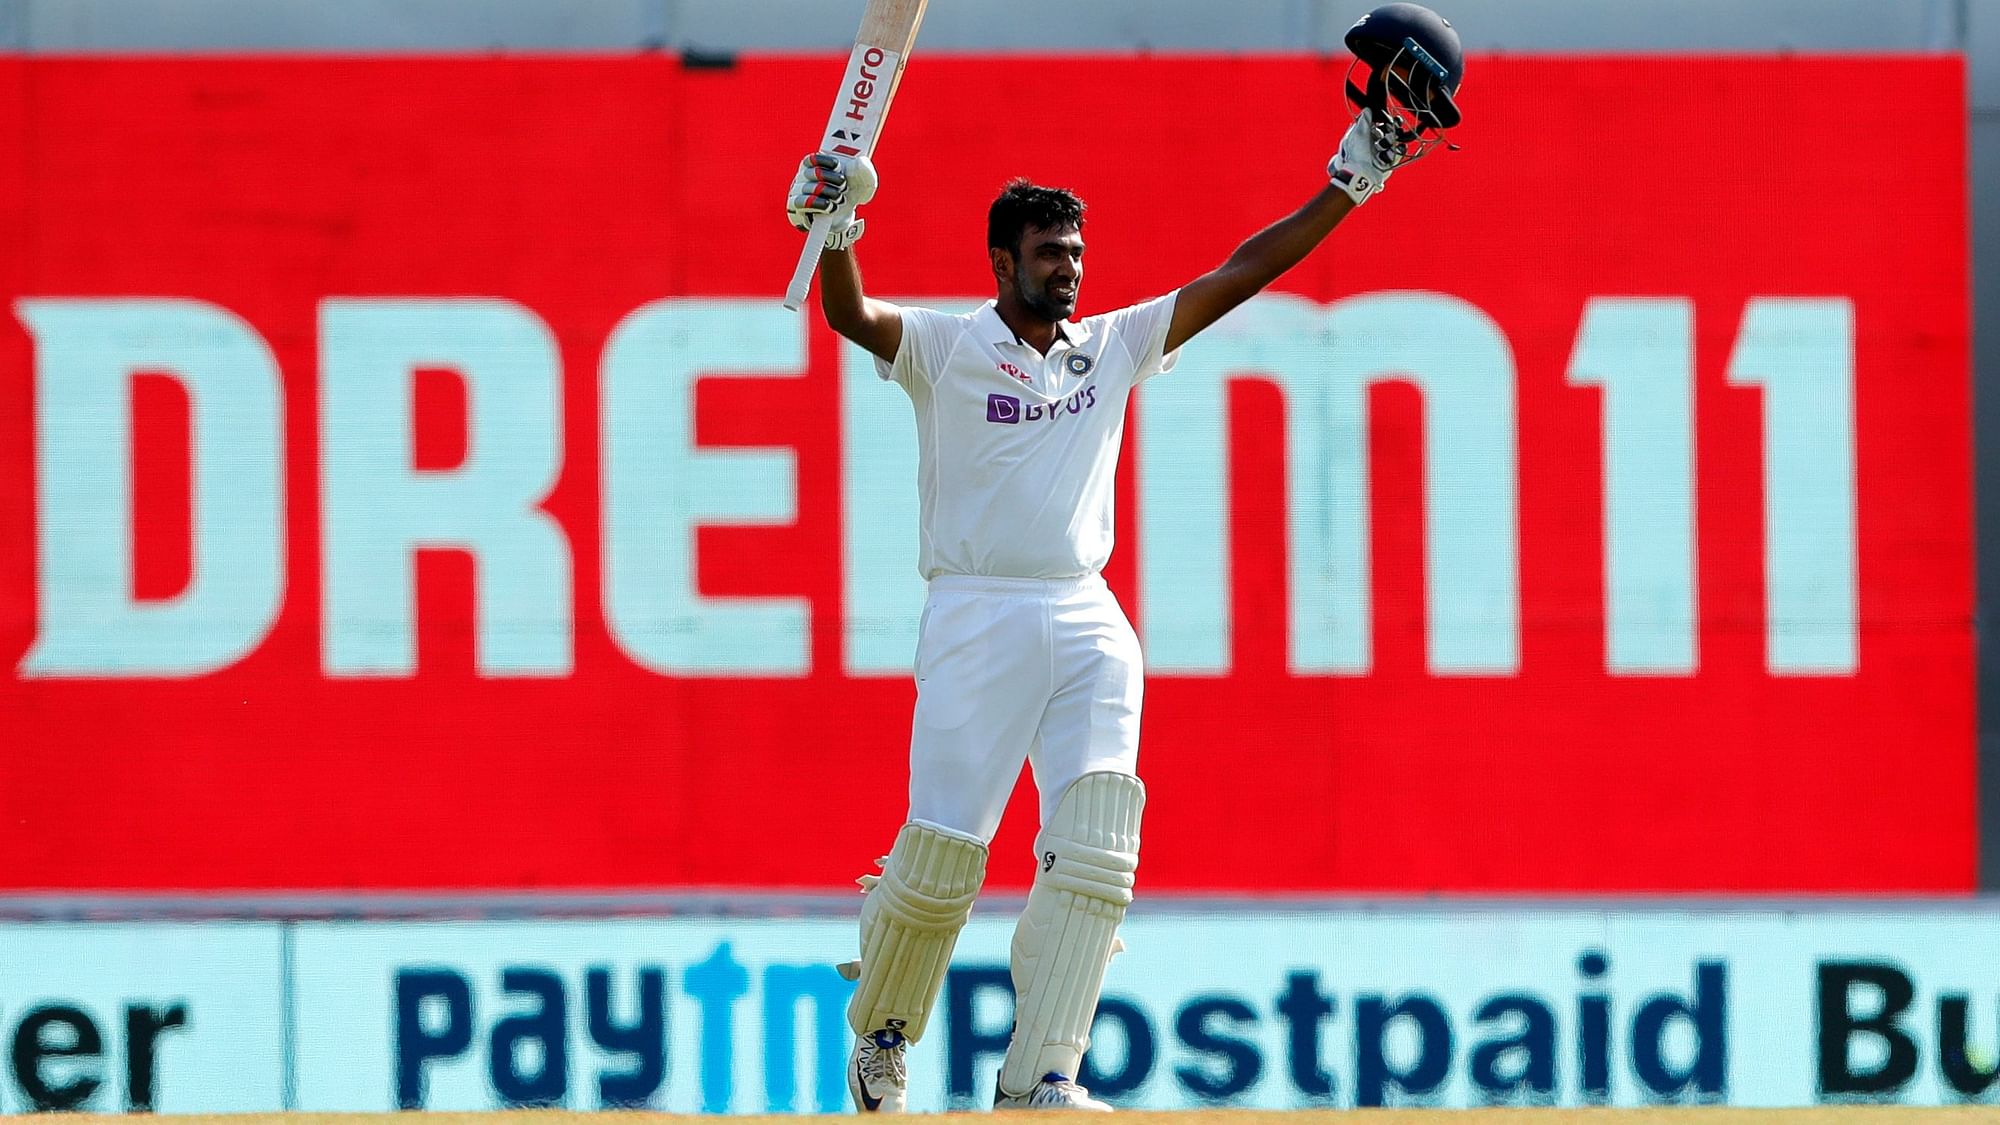 R Ashwin scored a century in the 2nd innings for India in the 2nd Chennai Test against England.